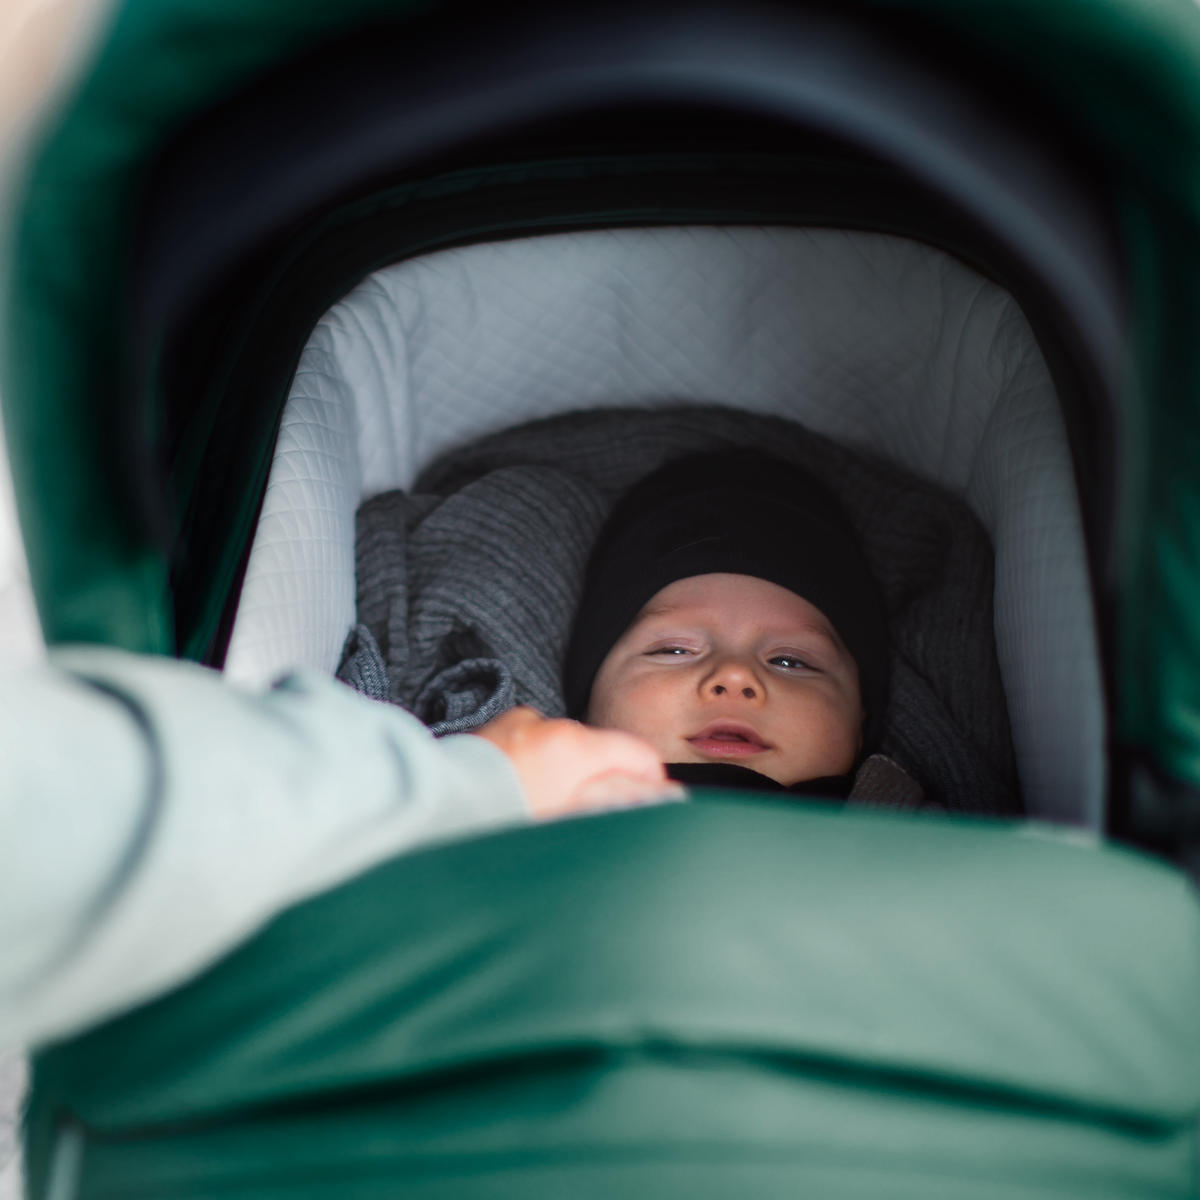 A close-up of a baby nestled inside a green Thule Sleek Bassinet.